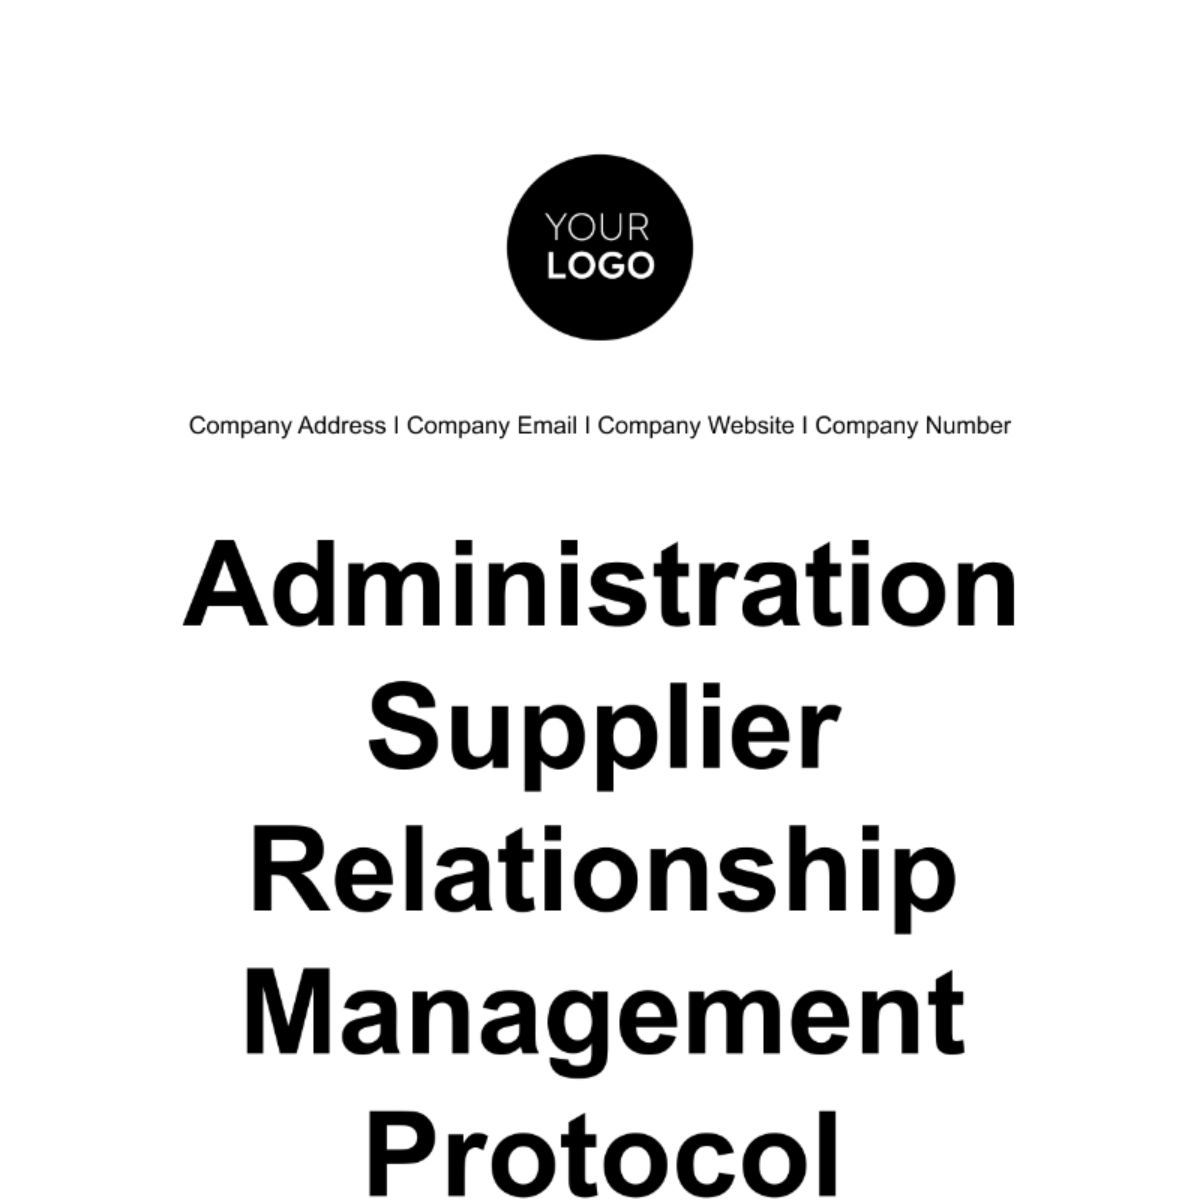 Administration Supplier Relationship Management Protocol Template